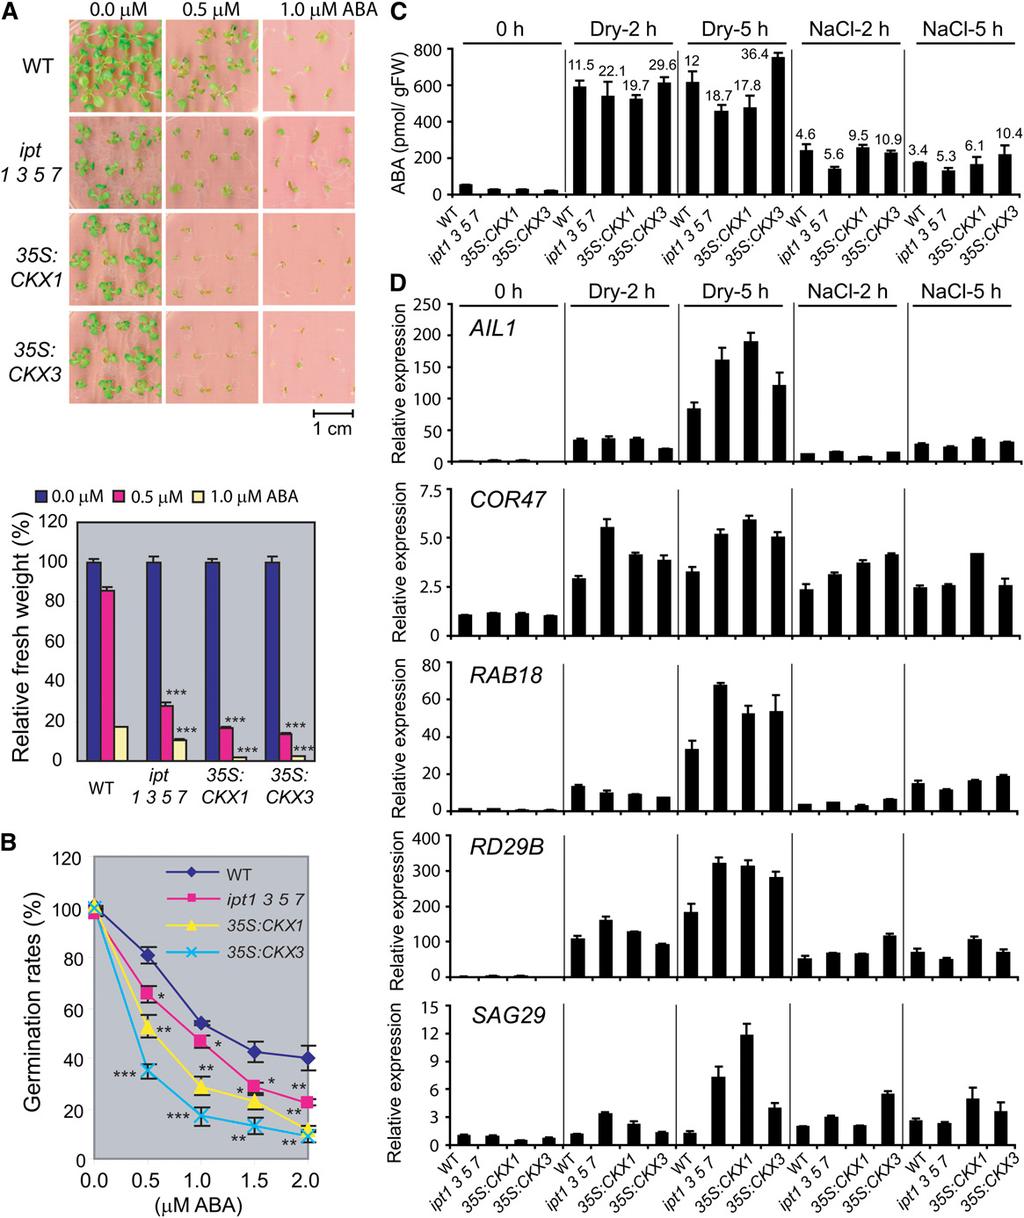 2176 The Plant Cell Figure 5. ABA Response of CK-Deficient Plants. (A) Response of the CK-deficient plants to exogenous ABA as determined by a growth inhibition assay.